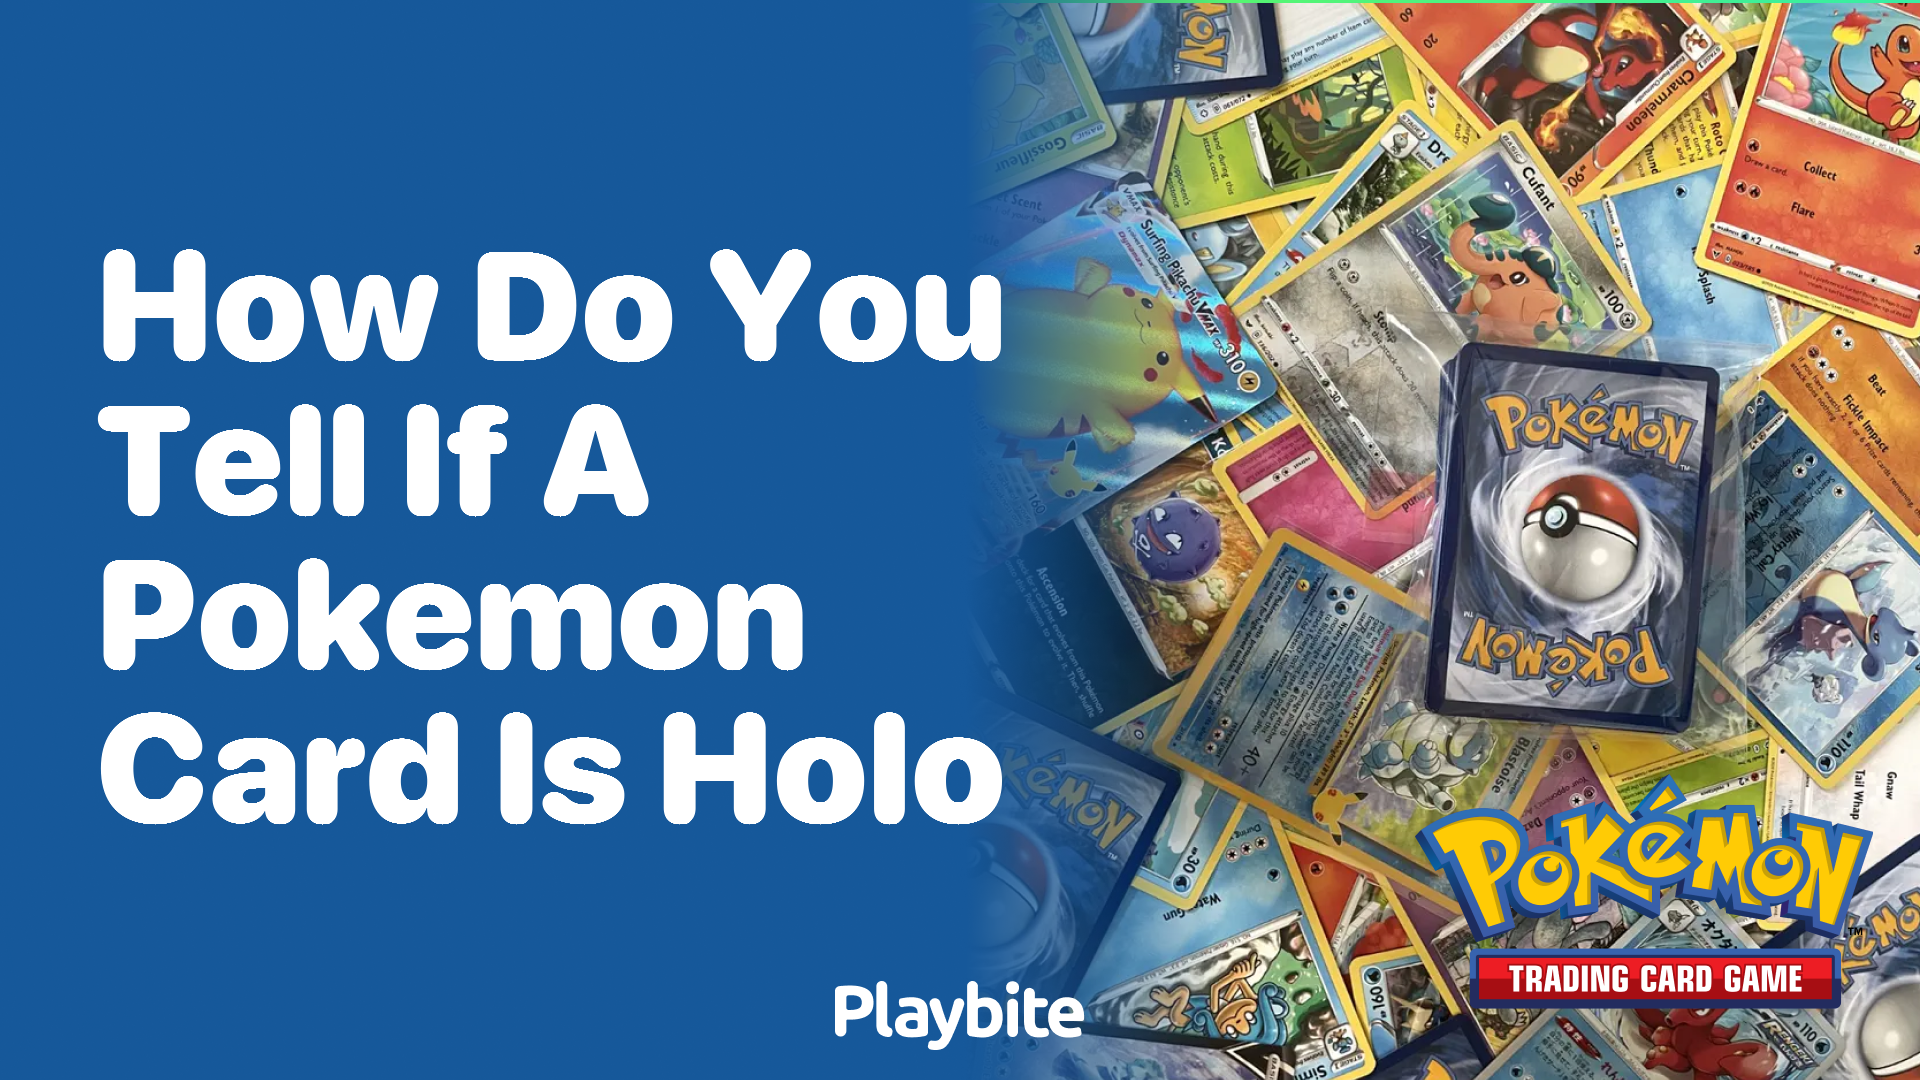 How Do You Tell If a Pokemon Card Is Holo?